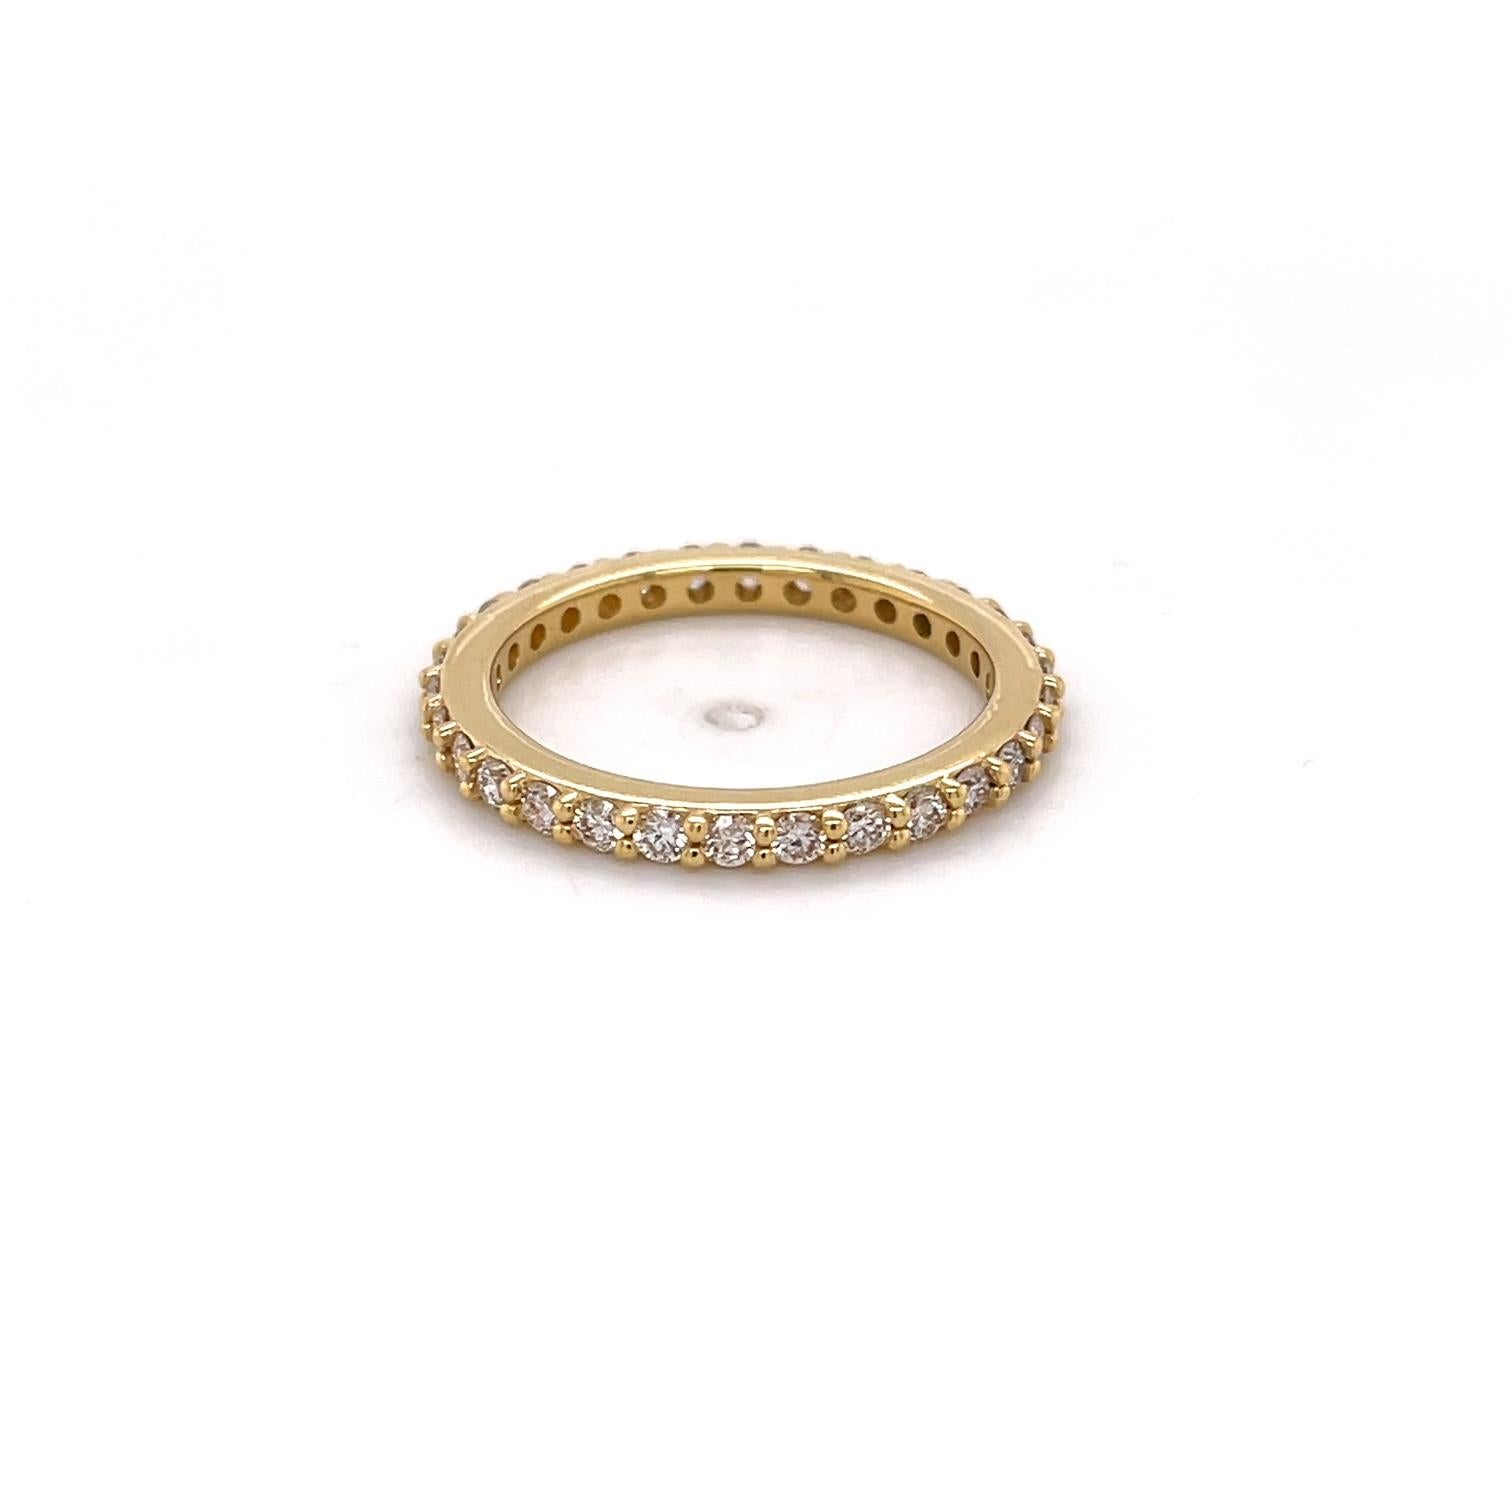 An 18k yellow gold anniversary band set with 30, 2mm top light brown diamonds for a total of .9 carats. This ring was made and designed by llyn strong.
This ring can be made into any size - price may vary.